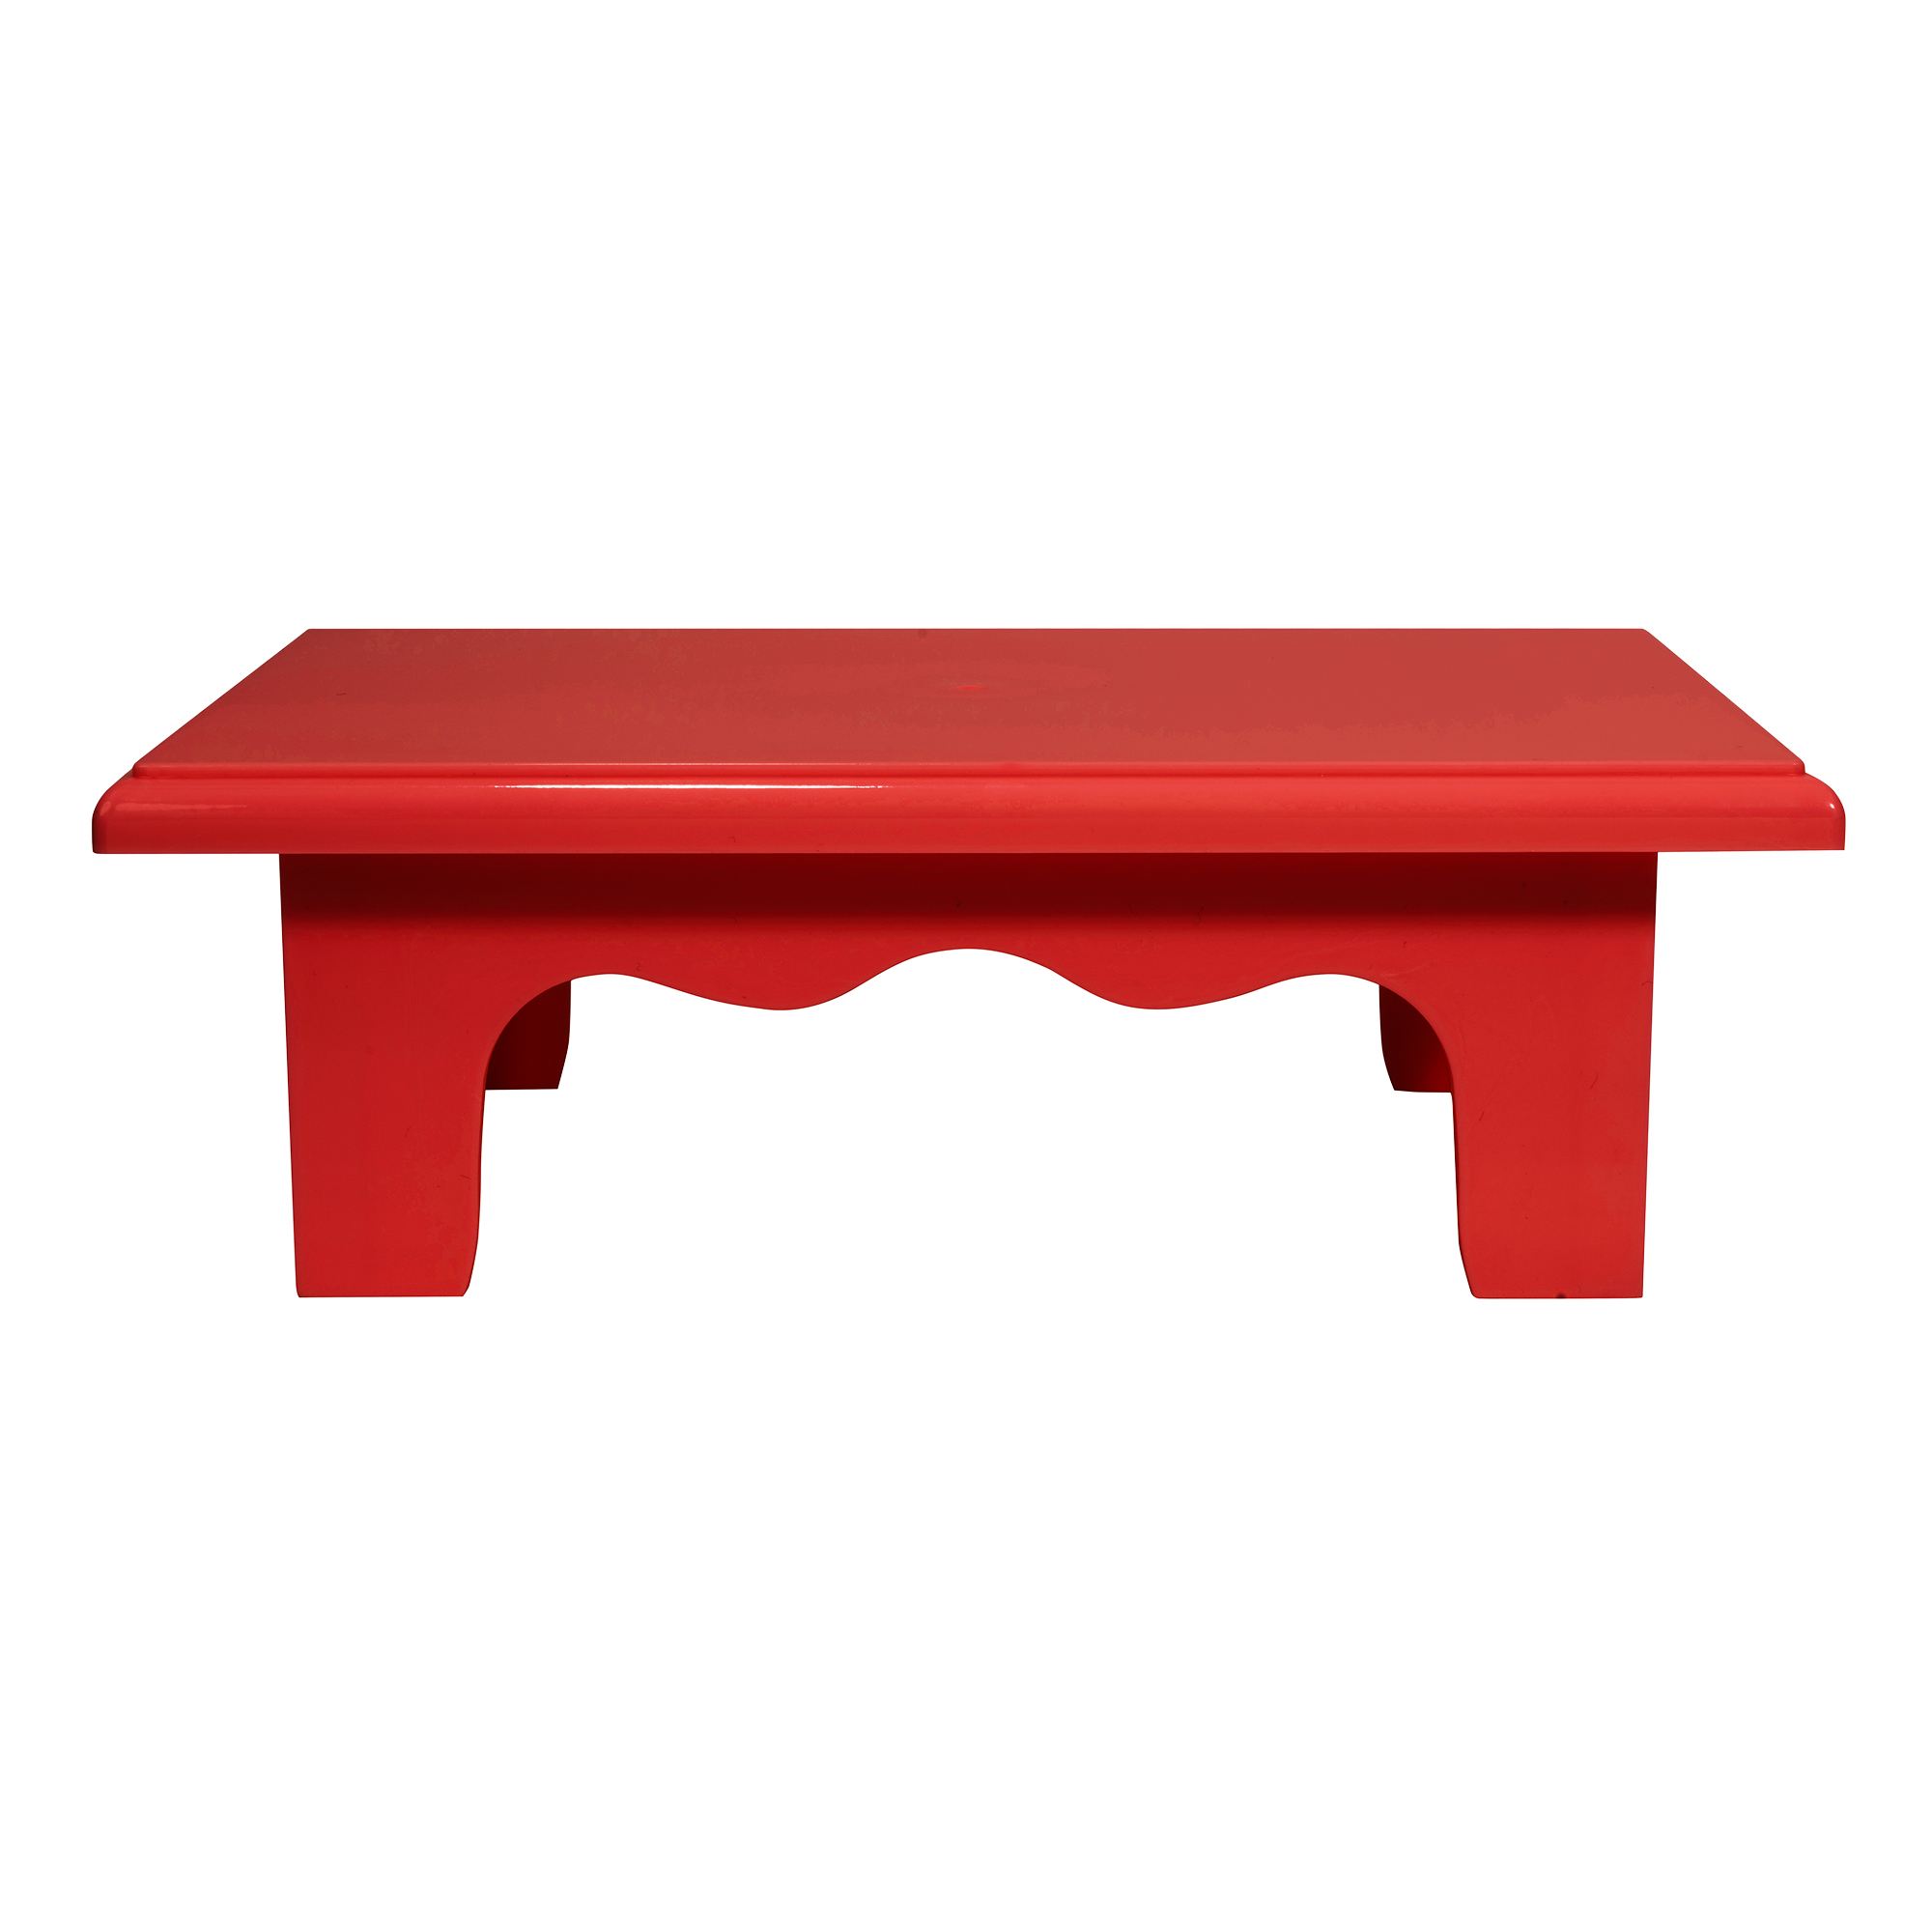 Plastic Treat Stand Riser - Red